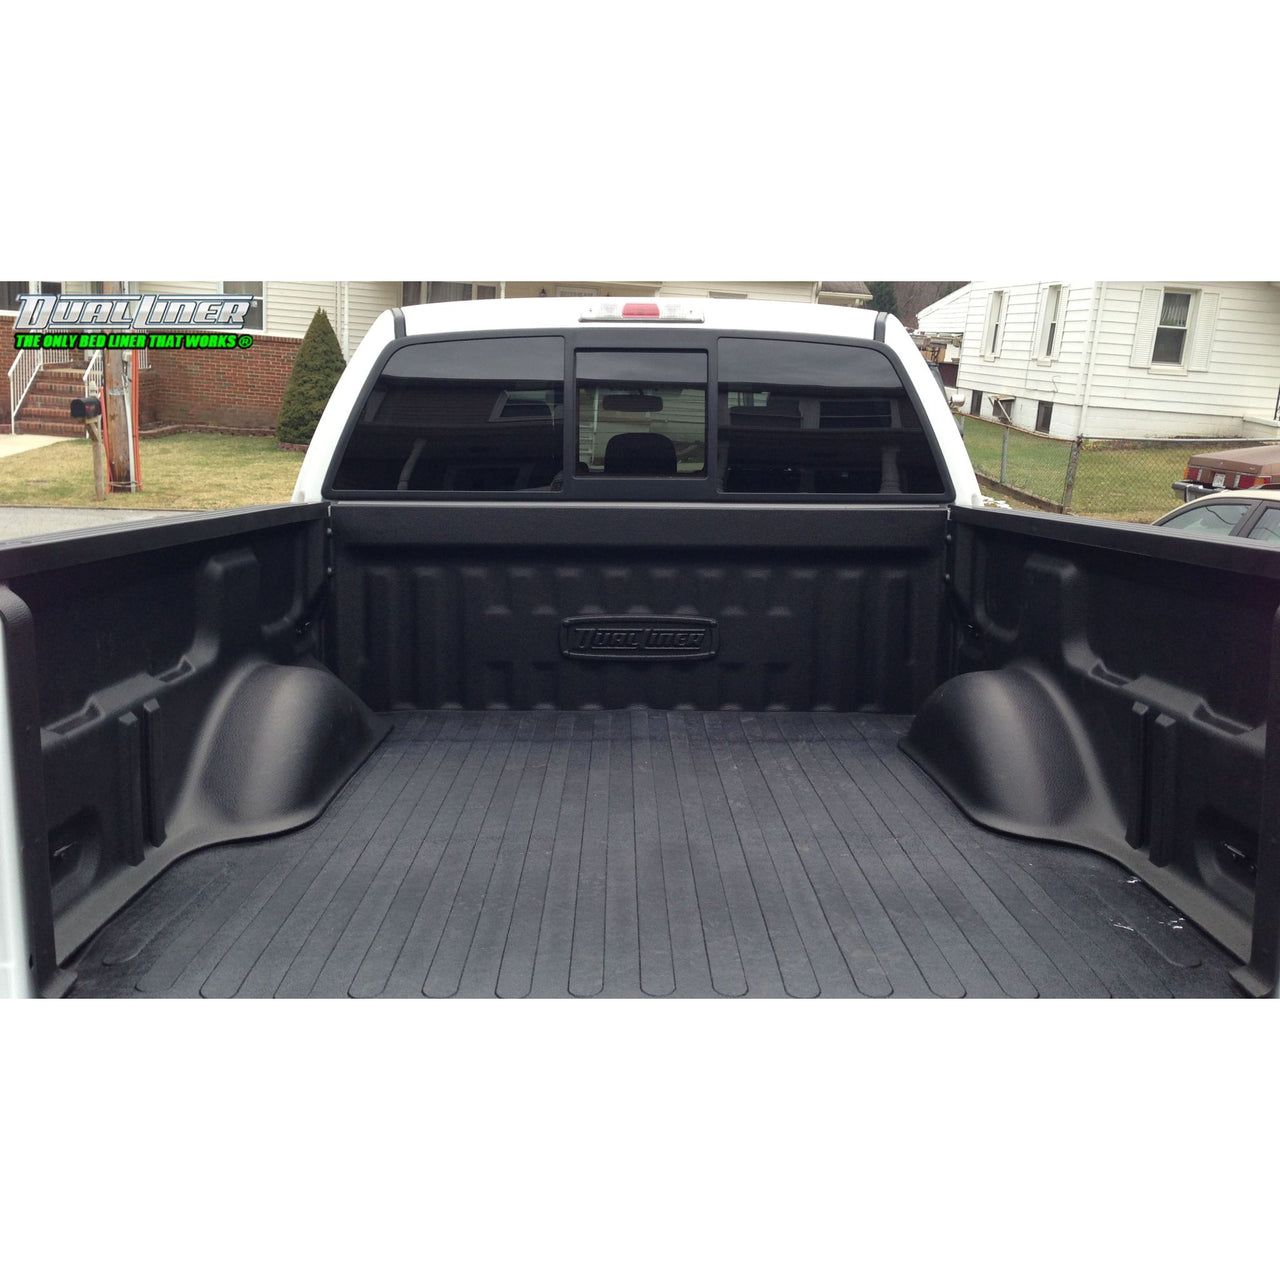 DualLiner 2017 to 2022 F-250 /F-350 (WITH LED Light Bar) - Long 6.75' Bed